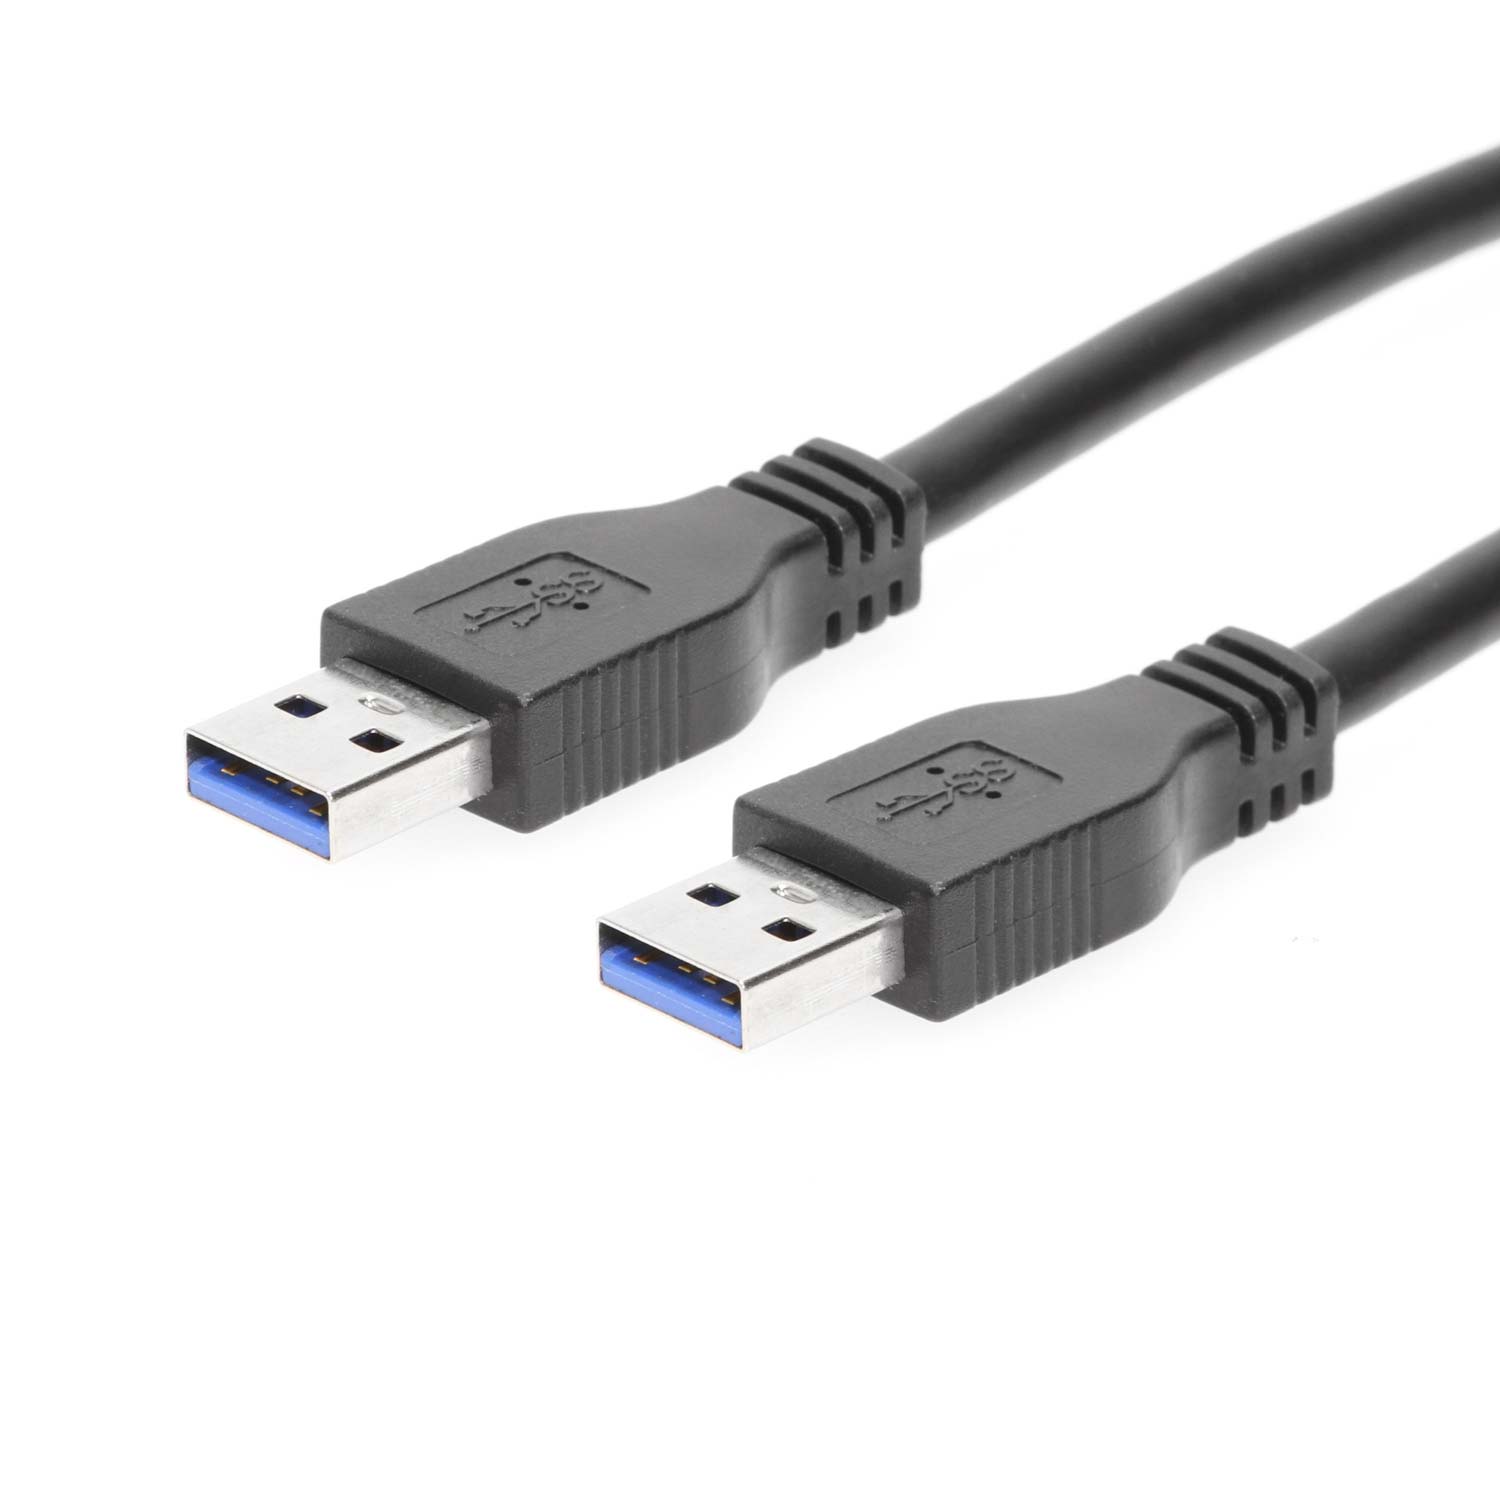 USB 3.0 SuperSpeed Extension Cable USB-A to USB-A, 3-ft.